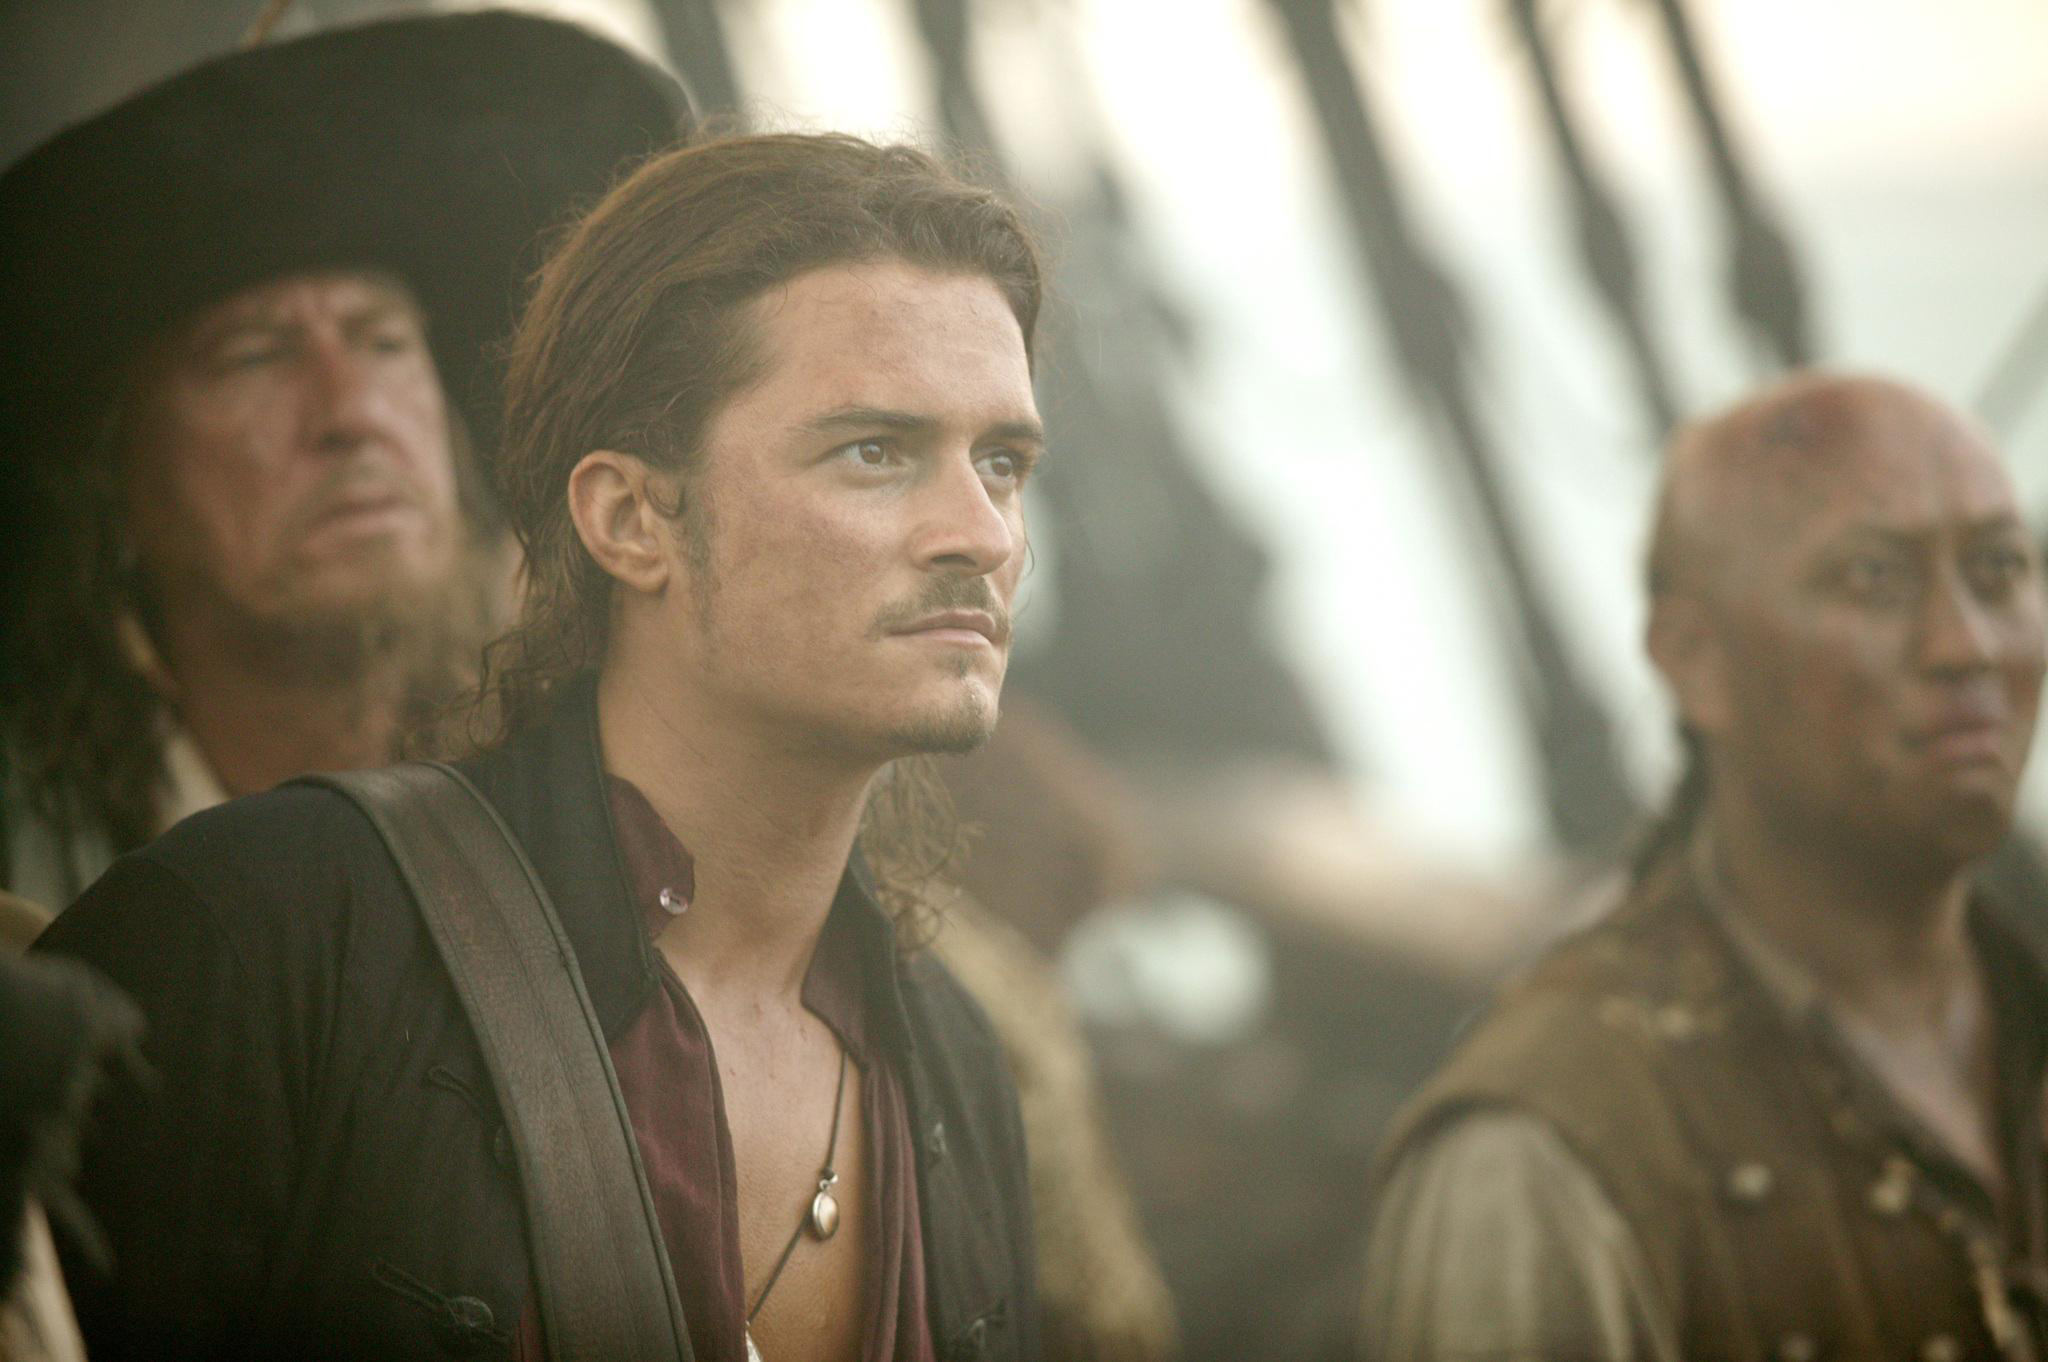 orlando bloom, movie, pirates of the caribbean: at world's end, geoffrey rush, hector barbossa, will turner, pirates of the caribbean